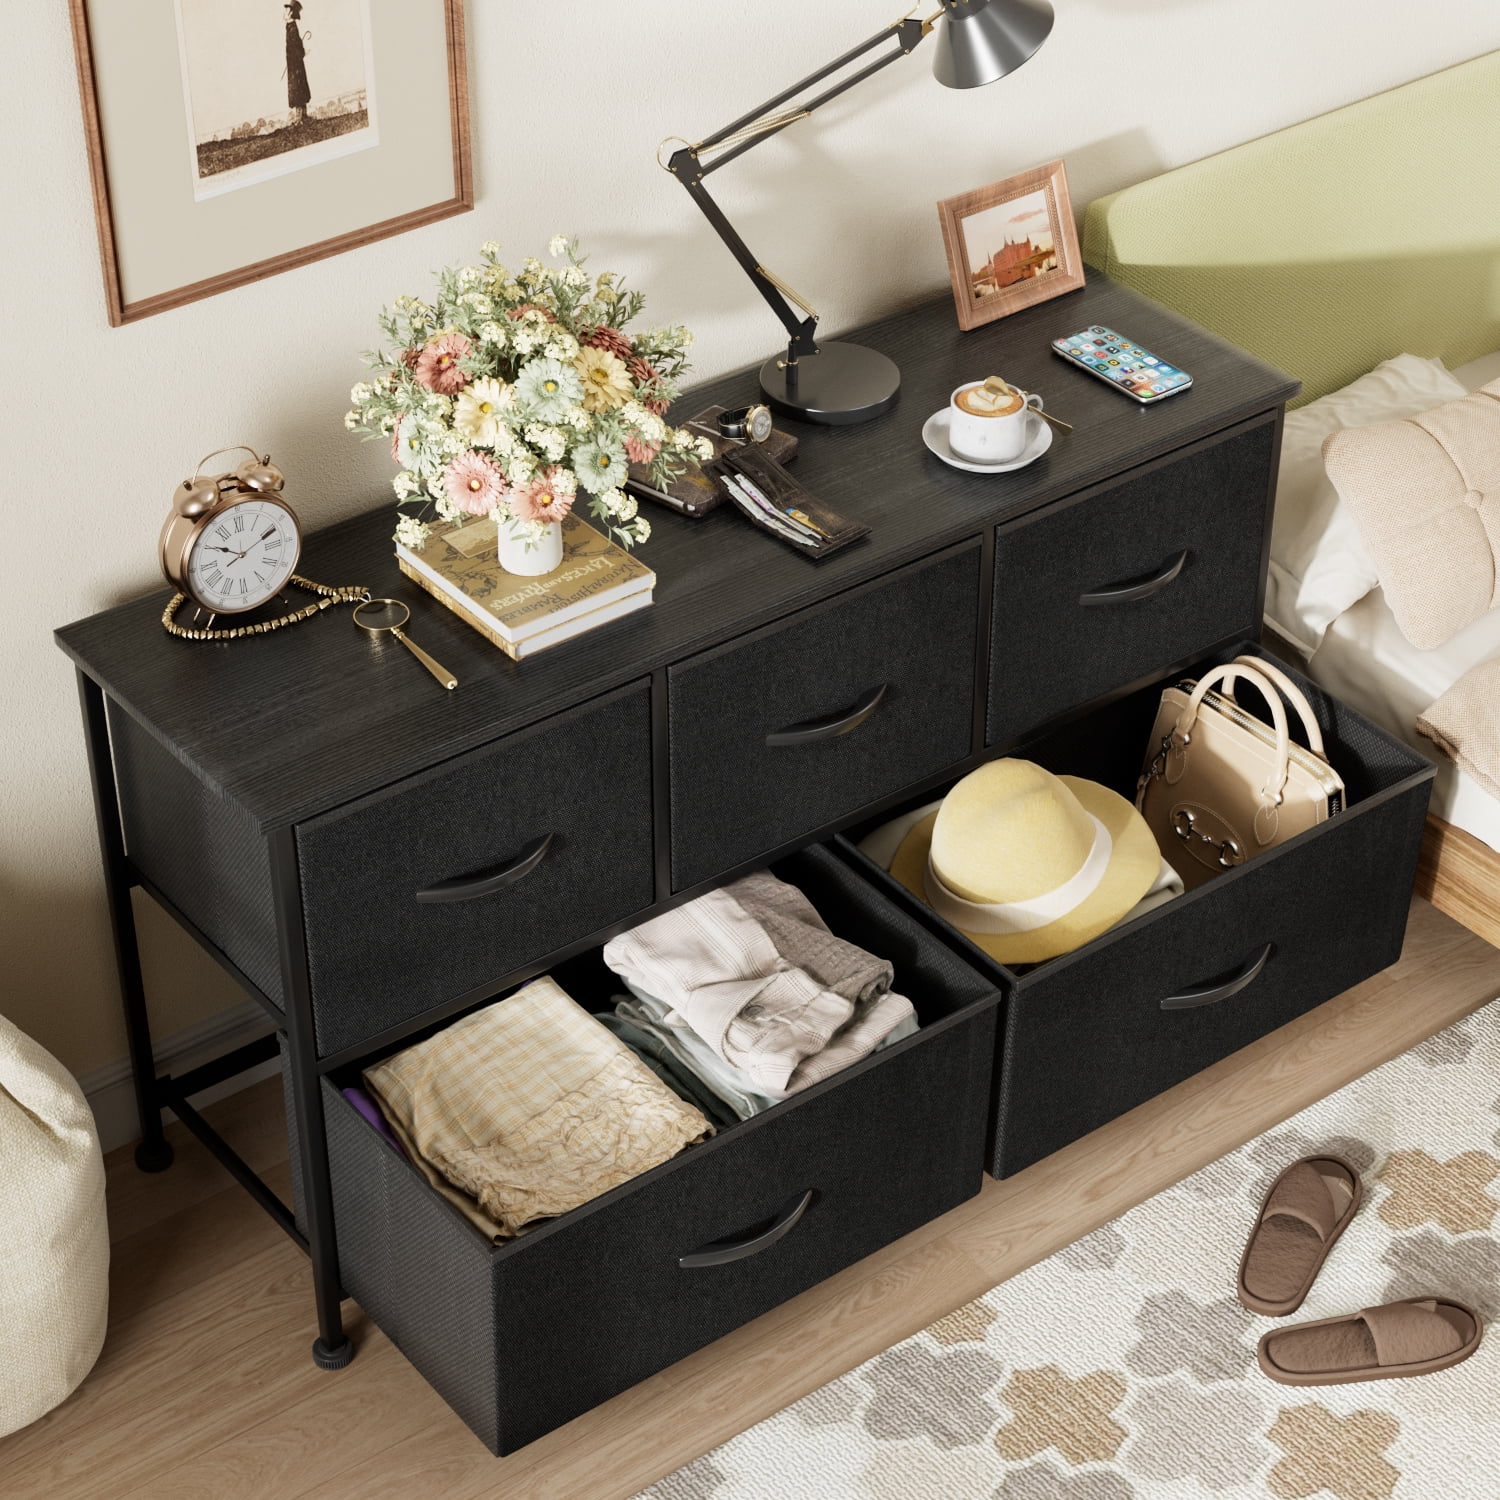 EYIW Modern 5 Drawers Wood Dresser with Solid Wood Handles, Foot